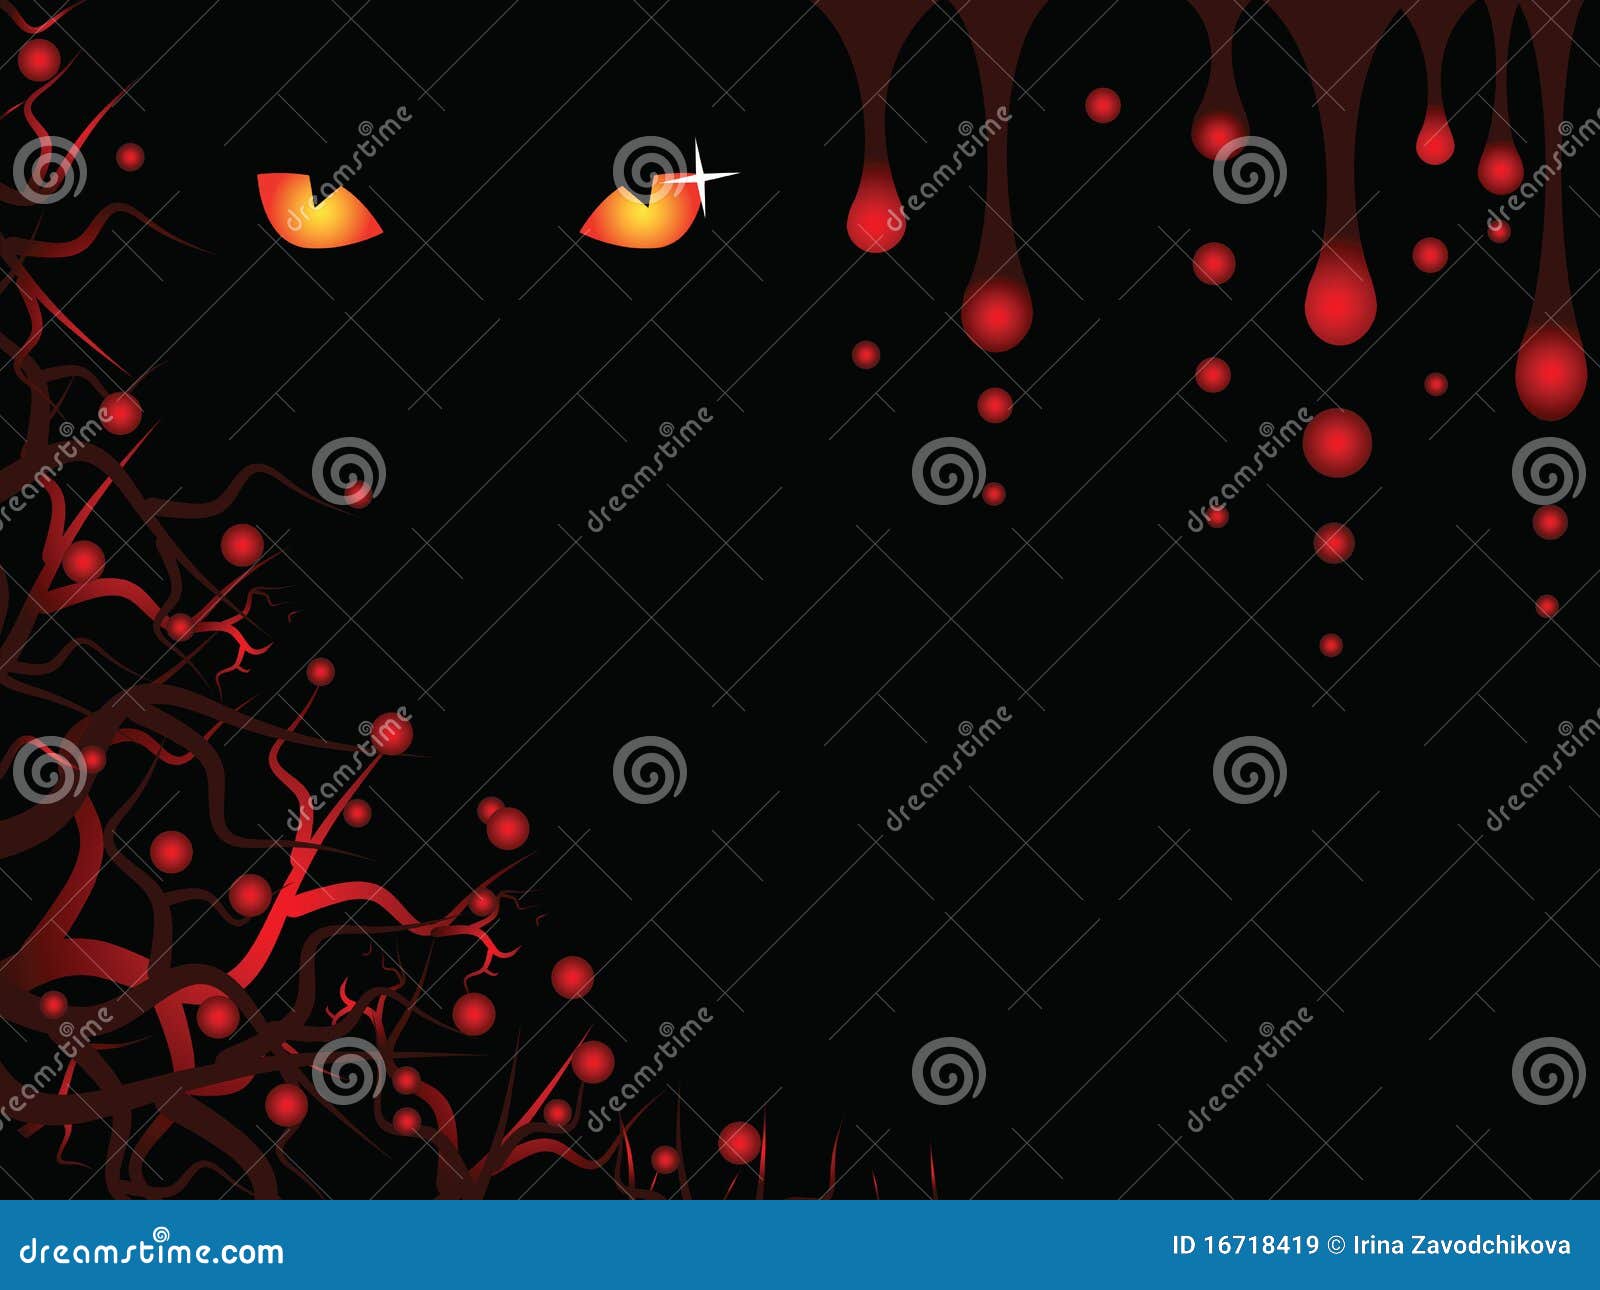 Mysterious background stock vector. Illustration of bleed - 16718419